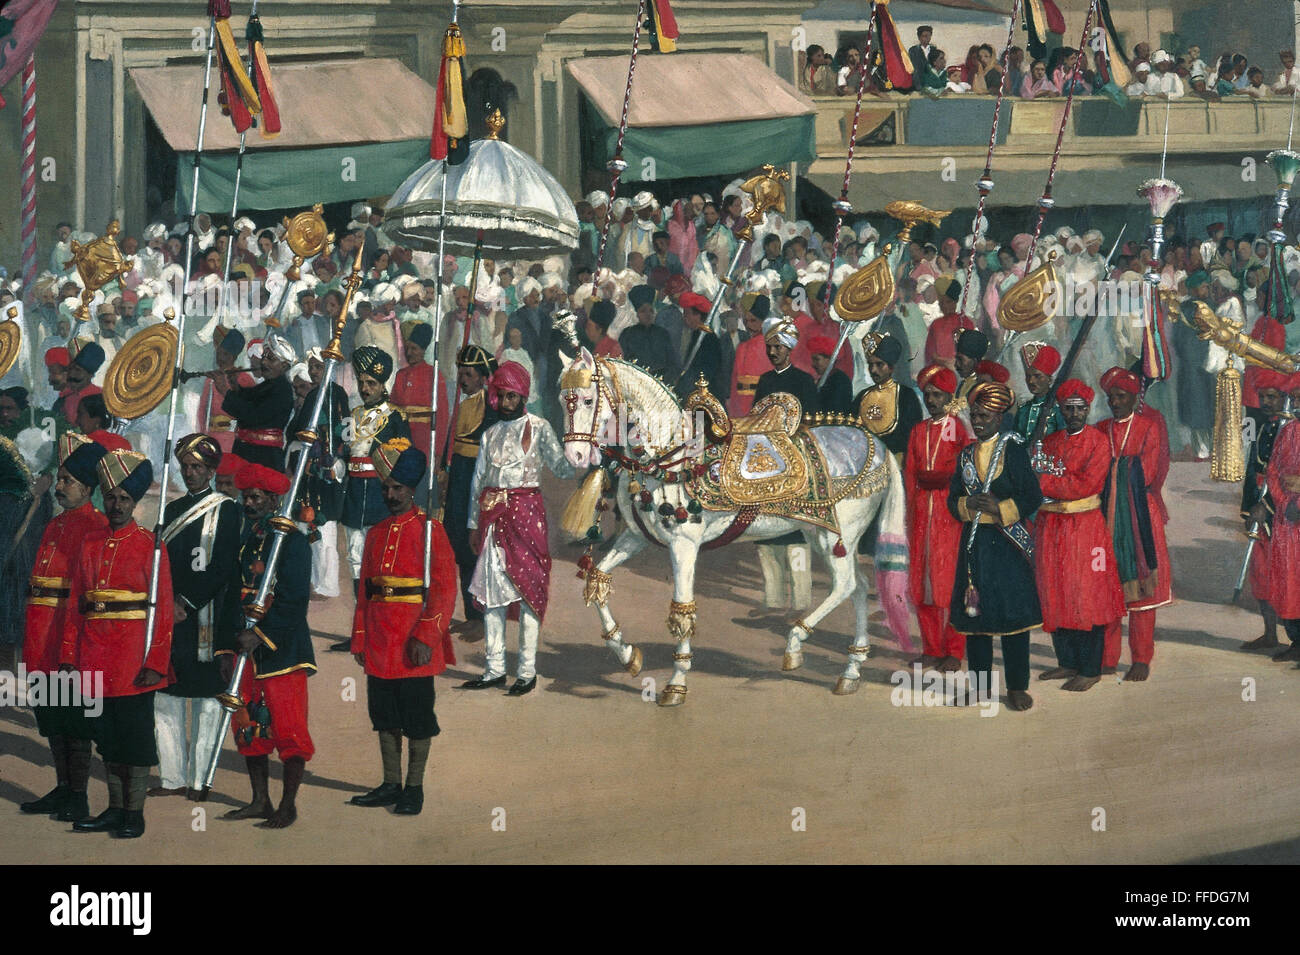 INDIA: PROCESSION. /nCeremonial procession in the state of Mysore, India, during the reign of Krishna Raja Wadiyar IV, 1902-1940. Detail of an Indian painting, early 20th century. Stock Photo